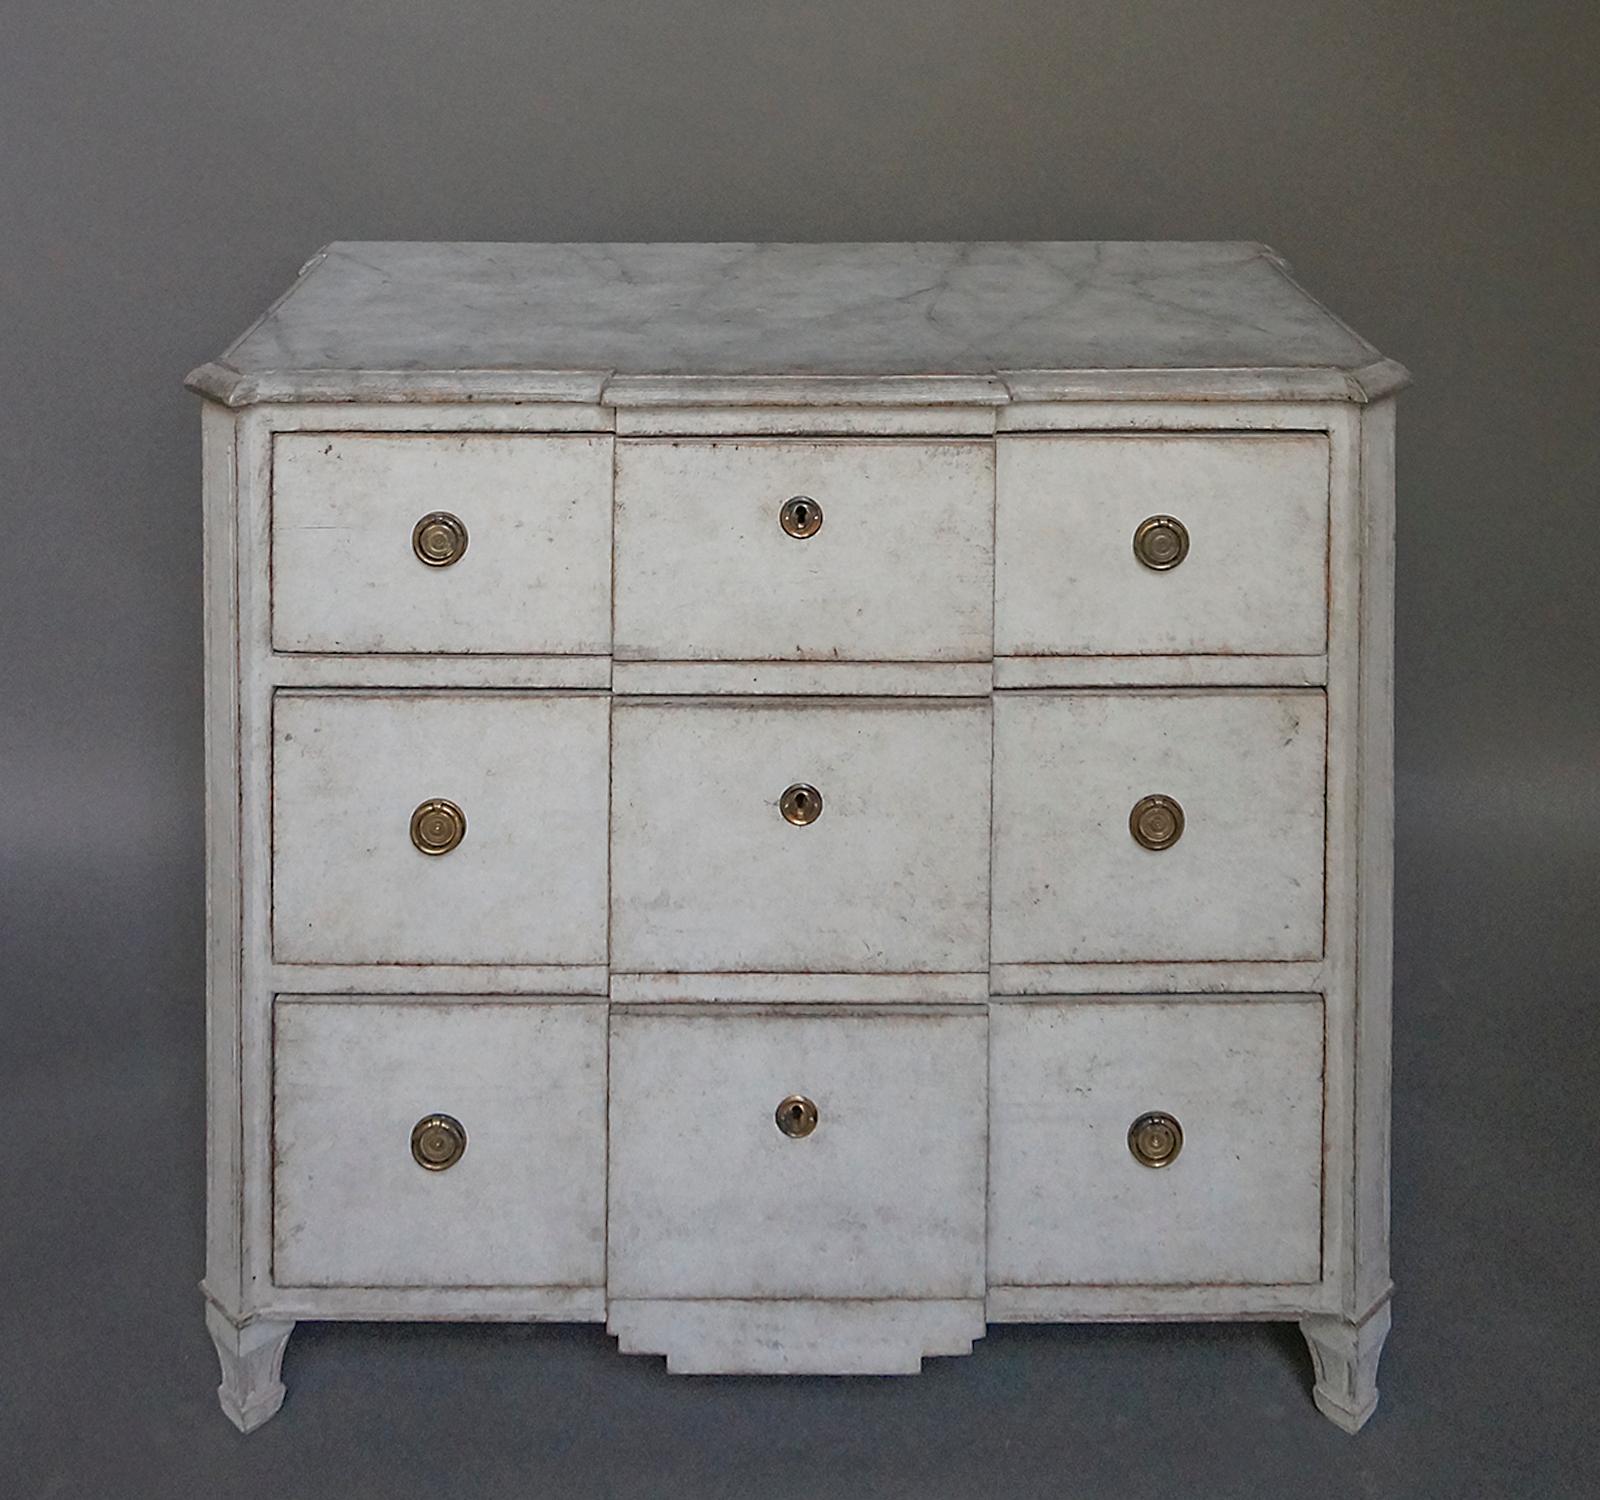 Simple Swedish commode, circa 1910, with three drawers, a block front and a decorative shaped apron. The top is painted with a smoky marbled pattern. A single key opens all three drawers.